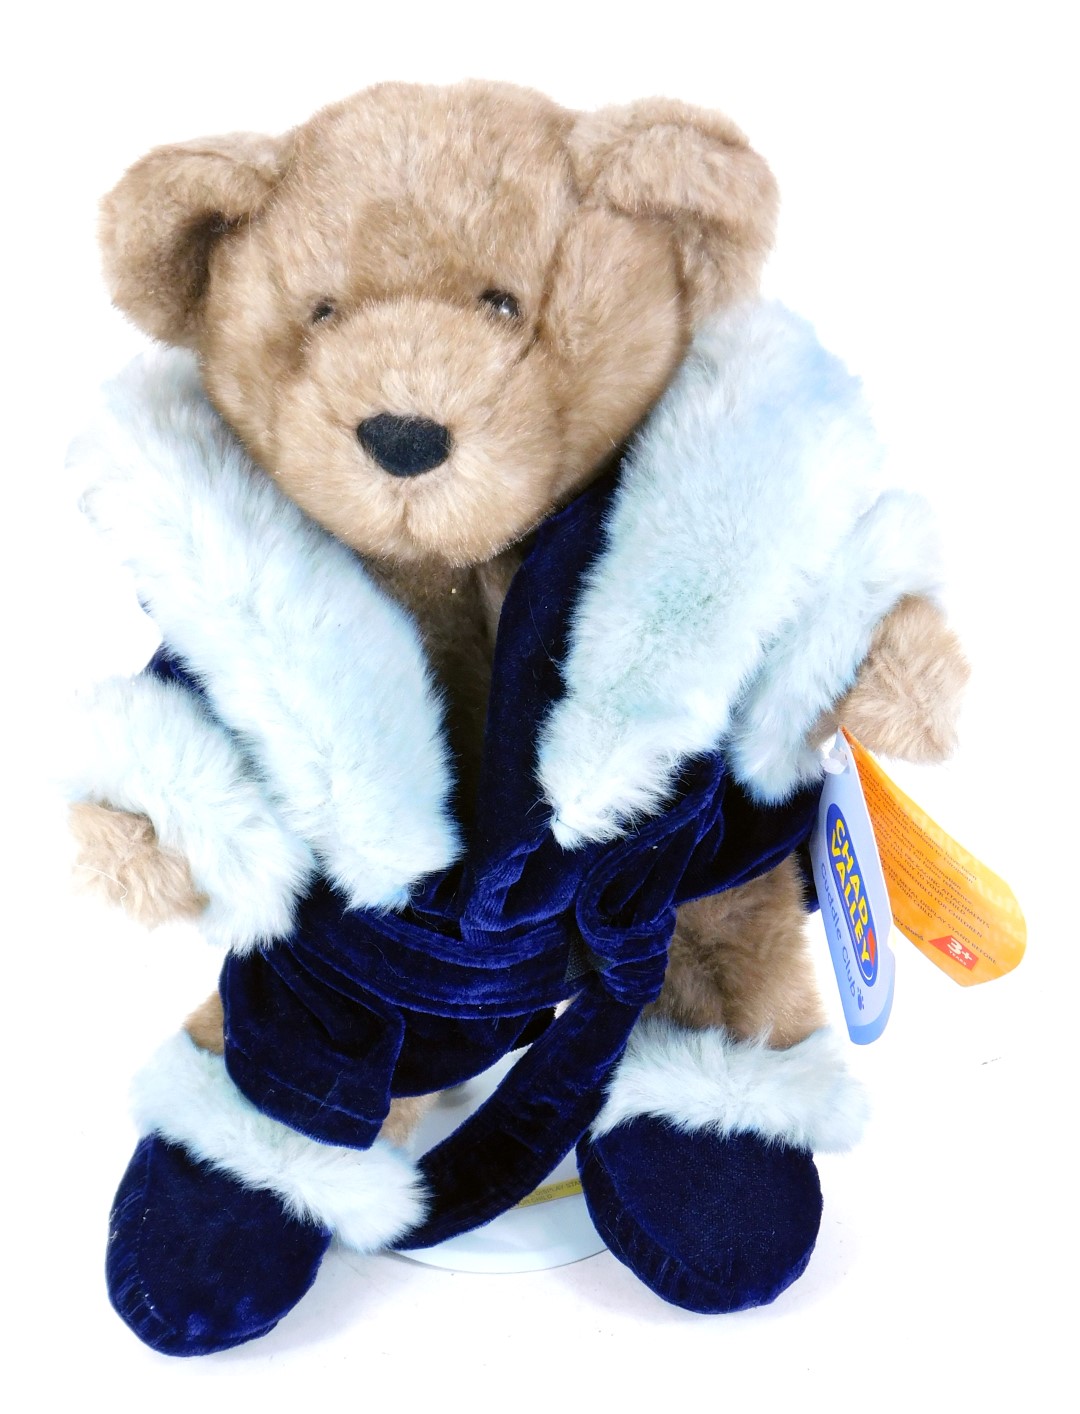 A Chad Valley Puddle Club Teddy bear, on stand, 36cm high.